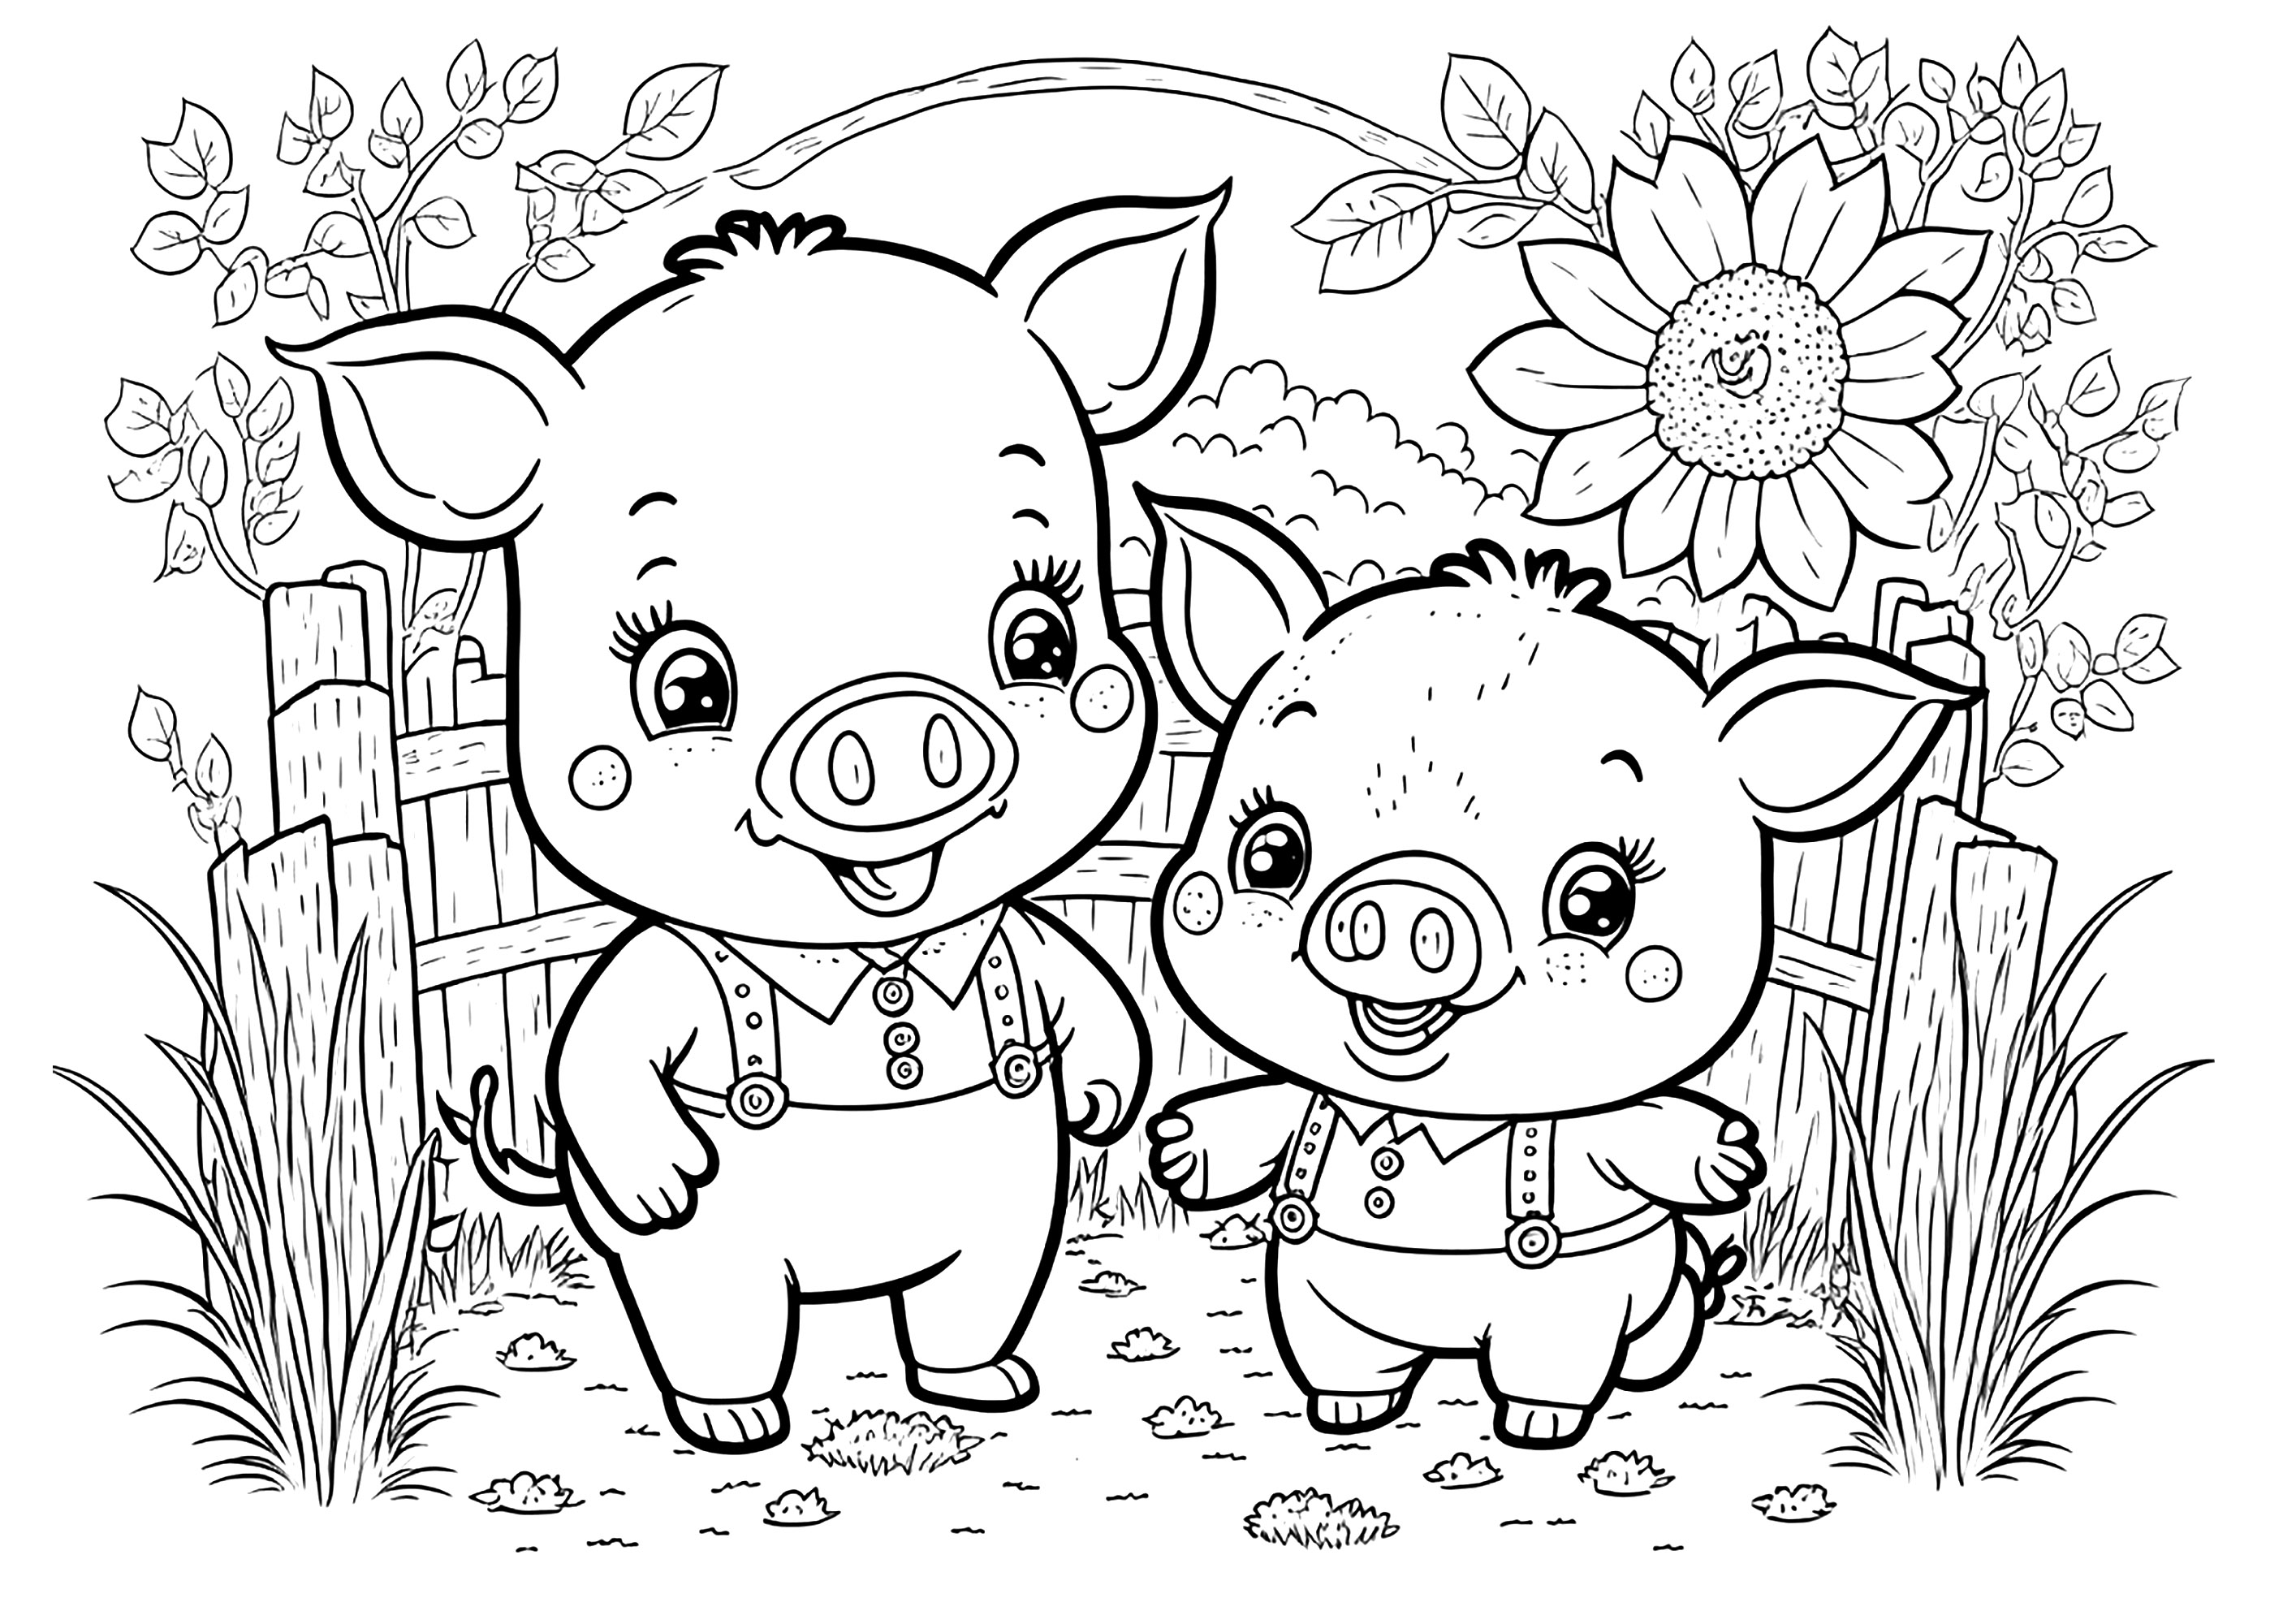 Two nice pigs, very friendly, to color